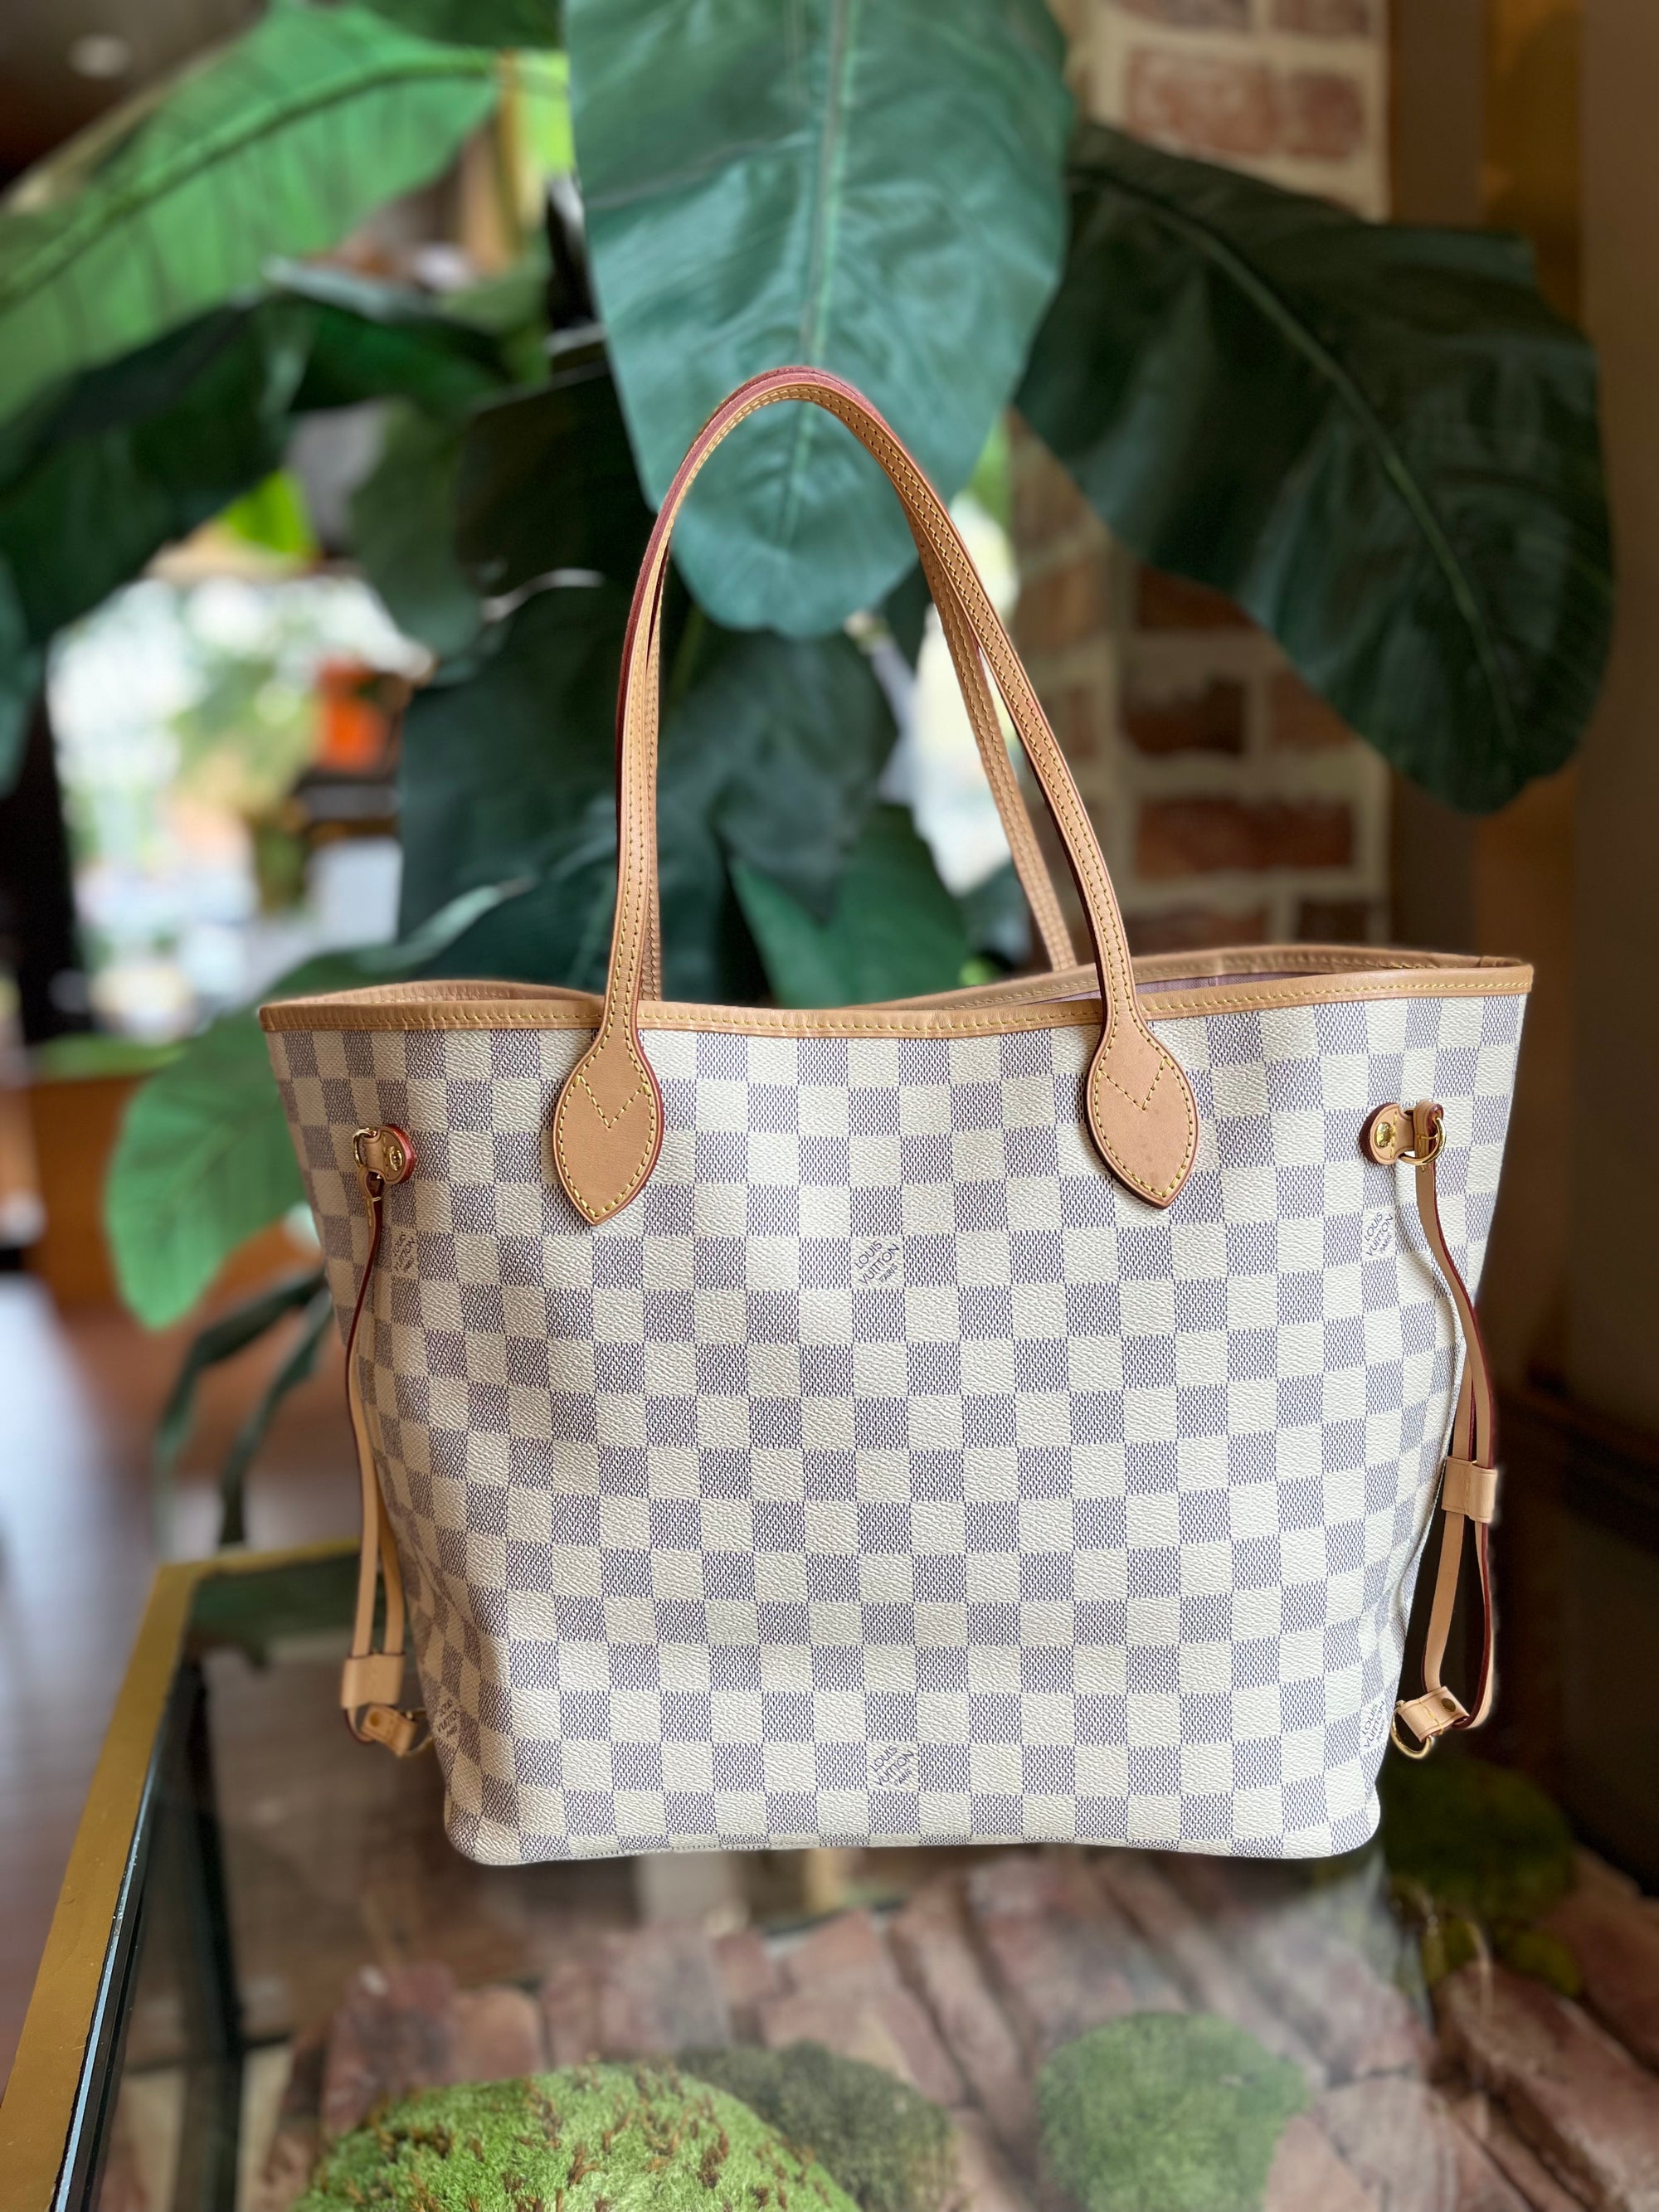 Authentic Louis Vuitton Bags, Shoes, and Accessories - The Purse